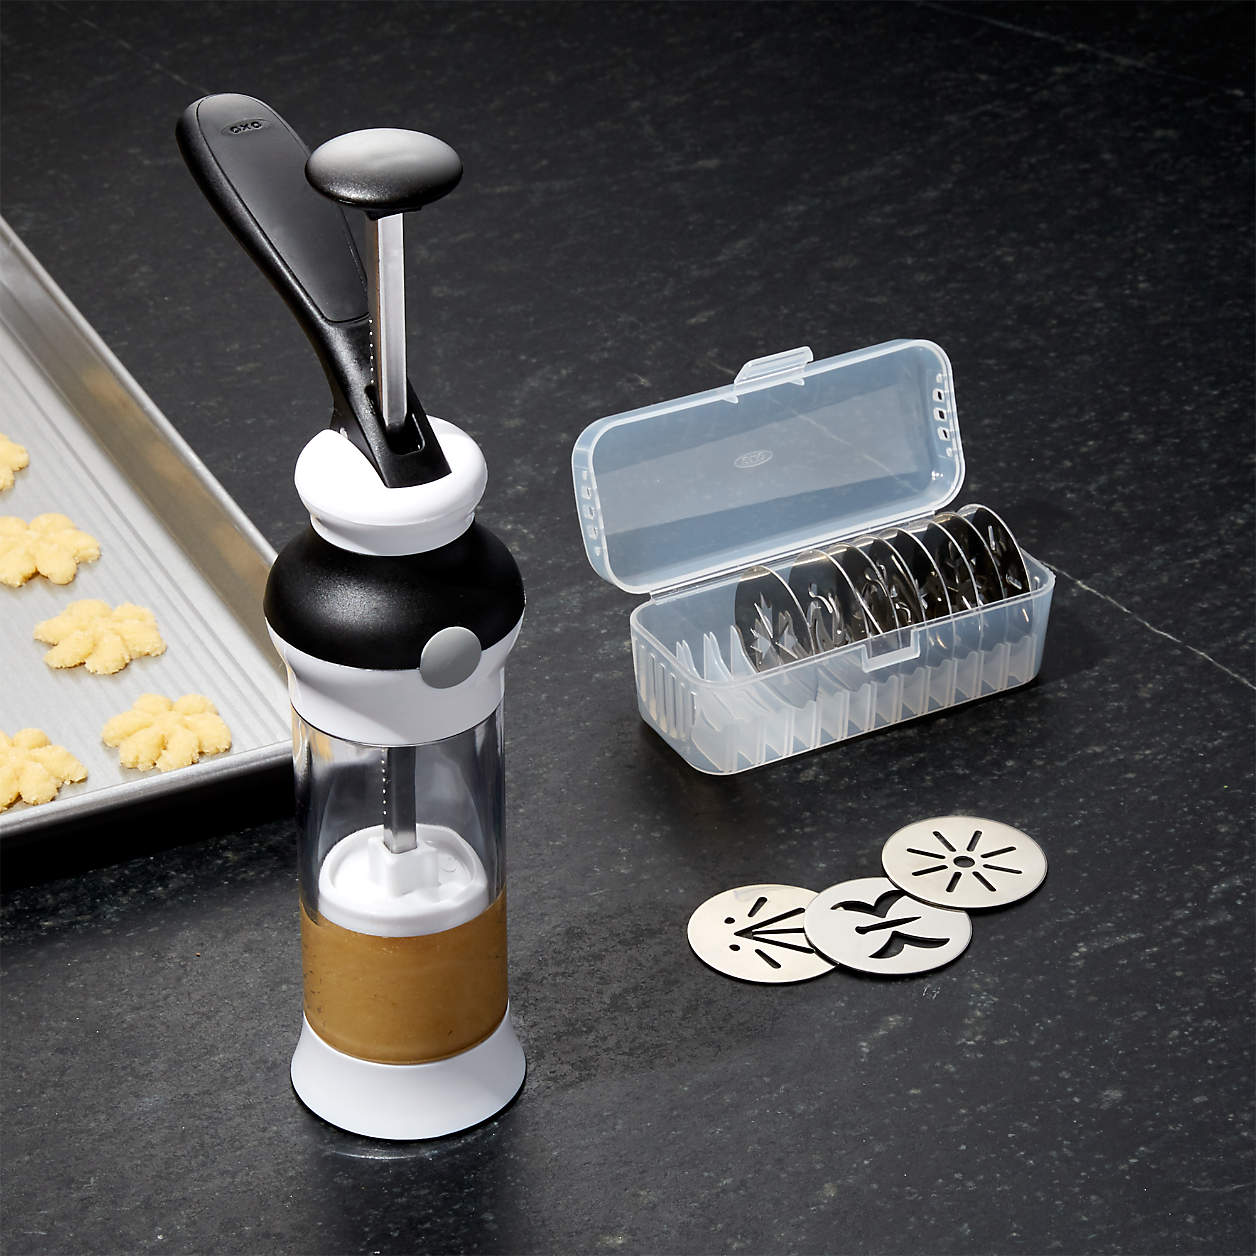 Autumn Cookie Disks/discs for Oxo Good Grips Cookie Press, Set of